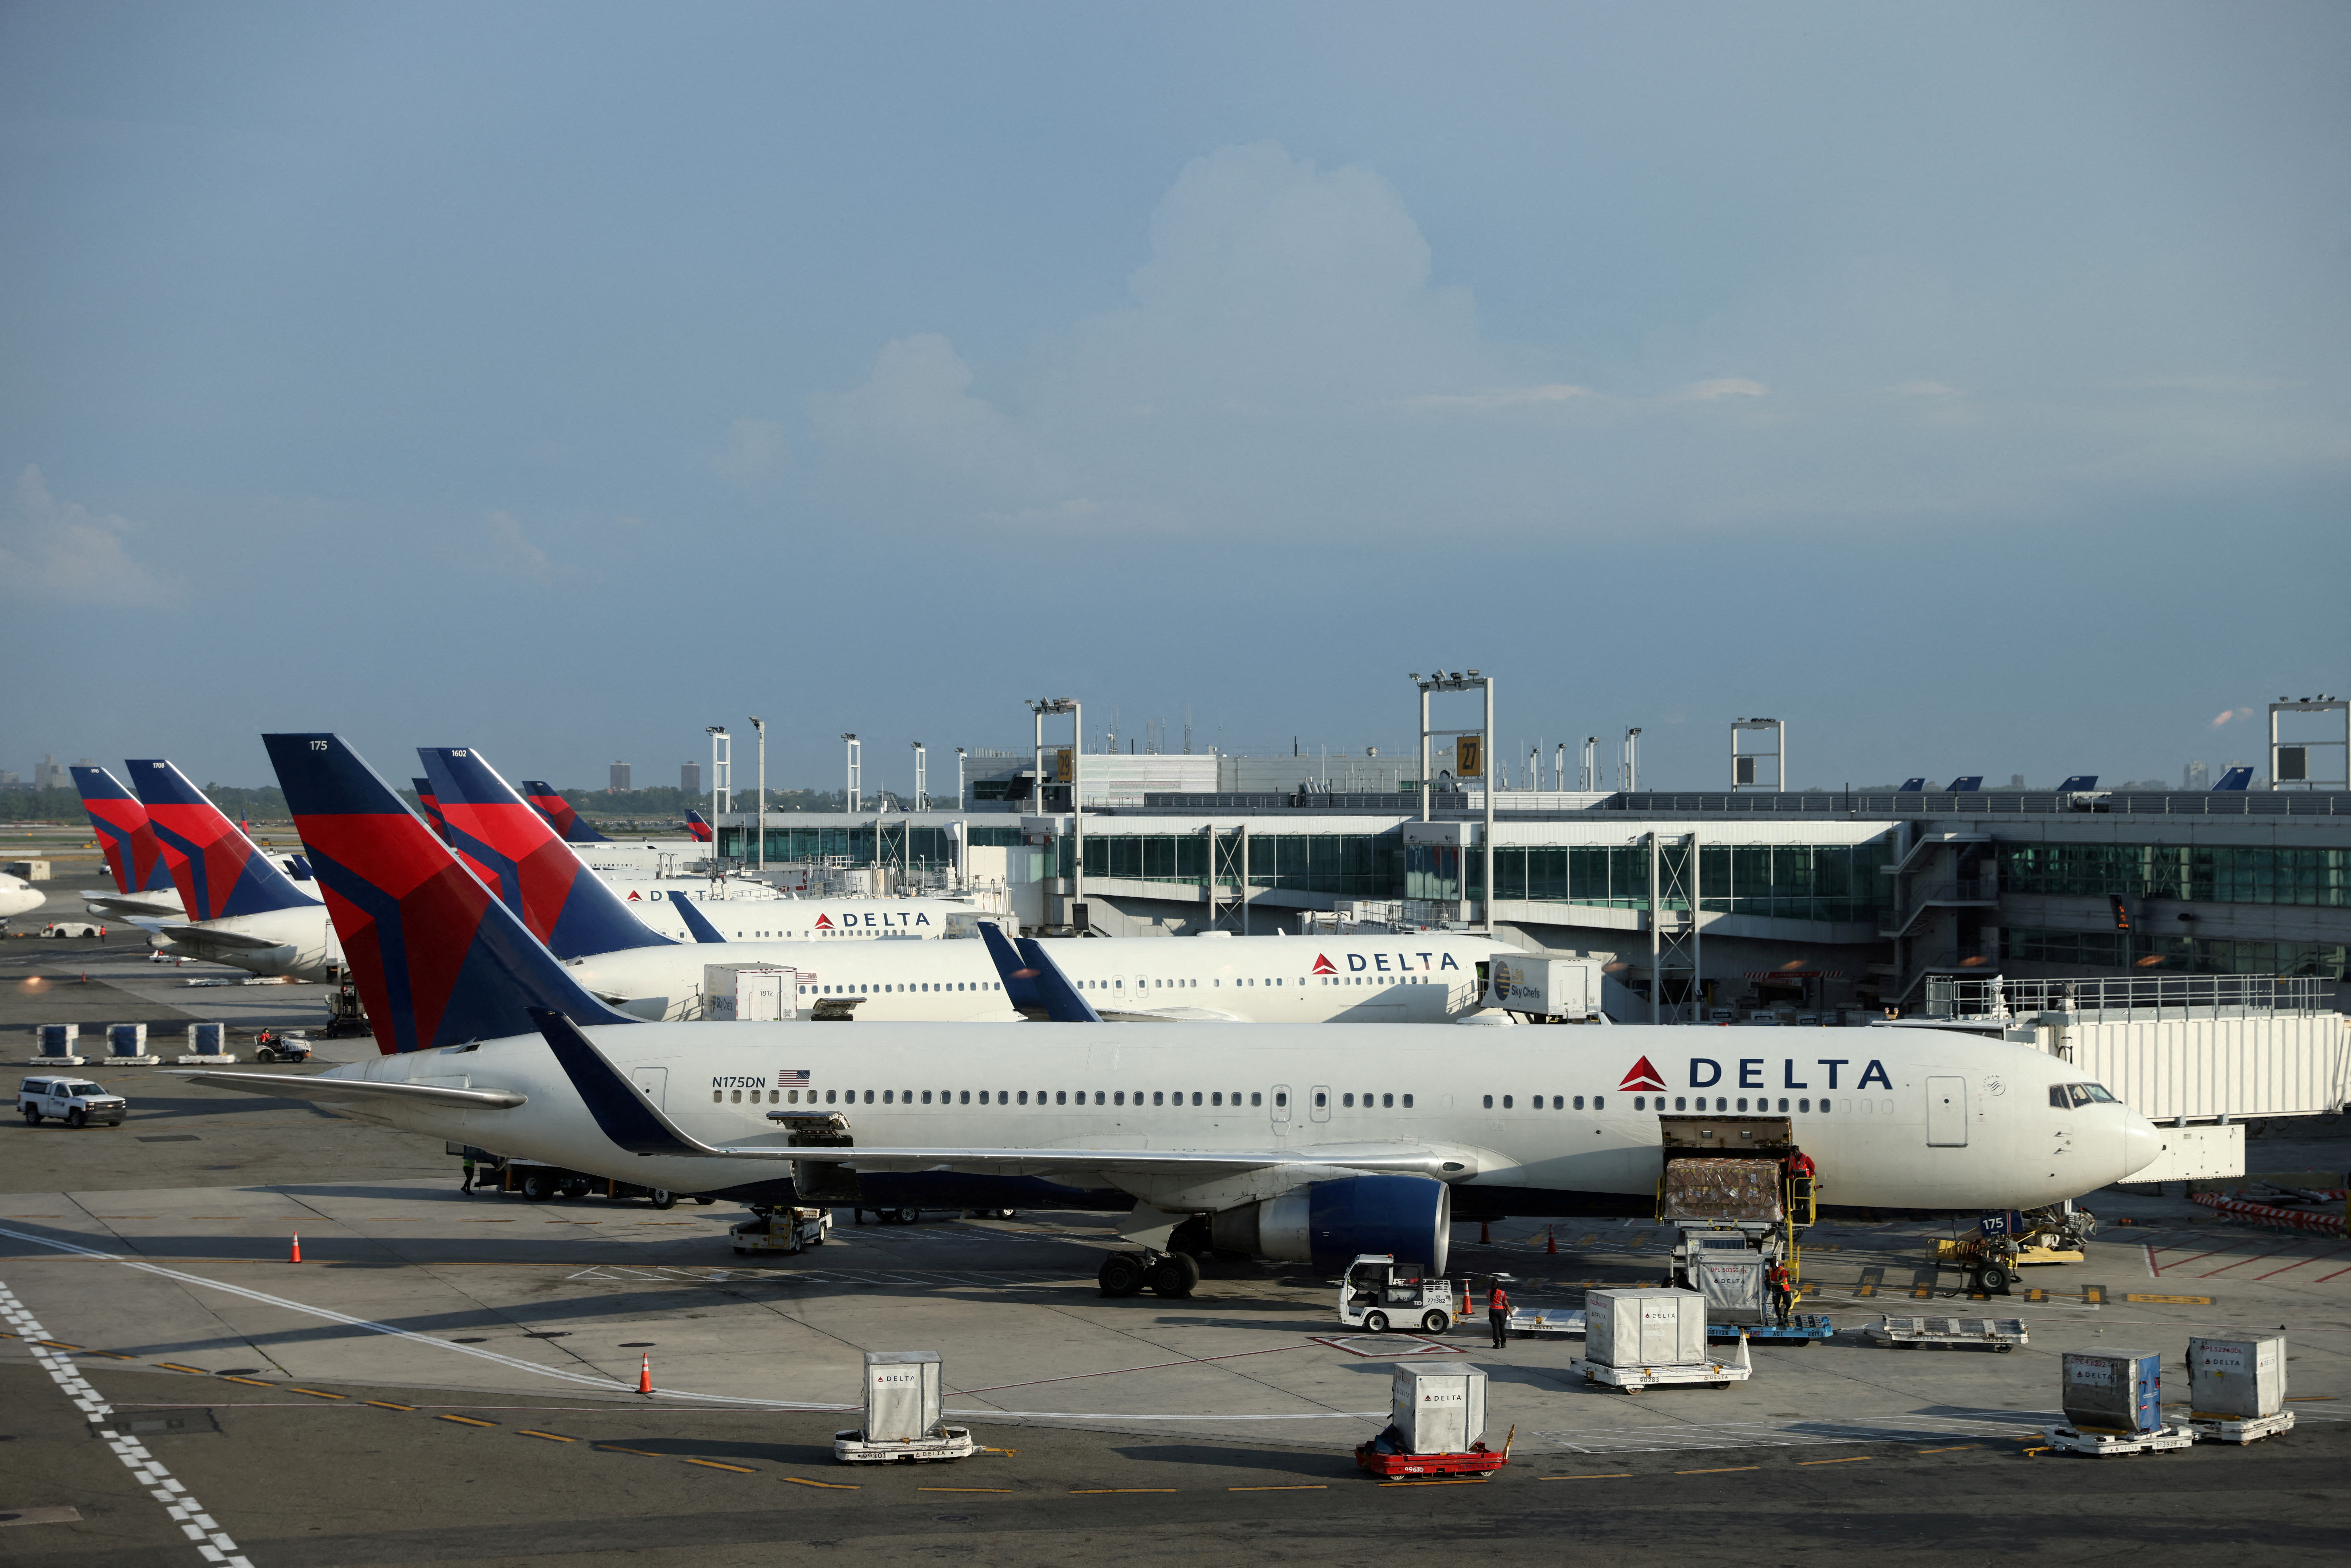 Delta Air Lines planes are seen at John F. Kennedy International Airport on the July 4th weekend in Queens, New York City